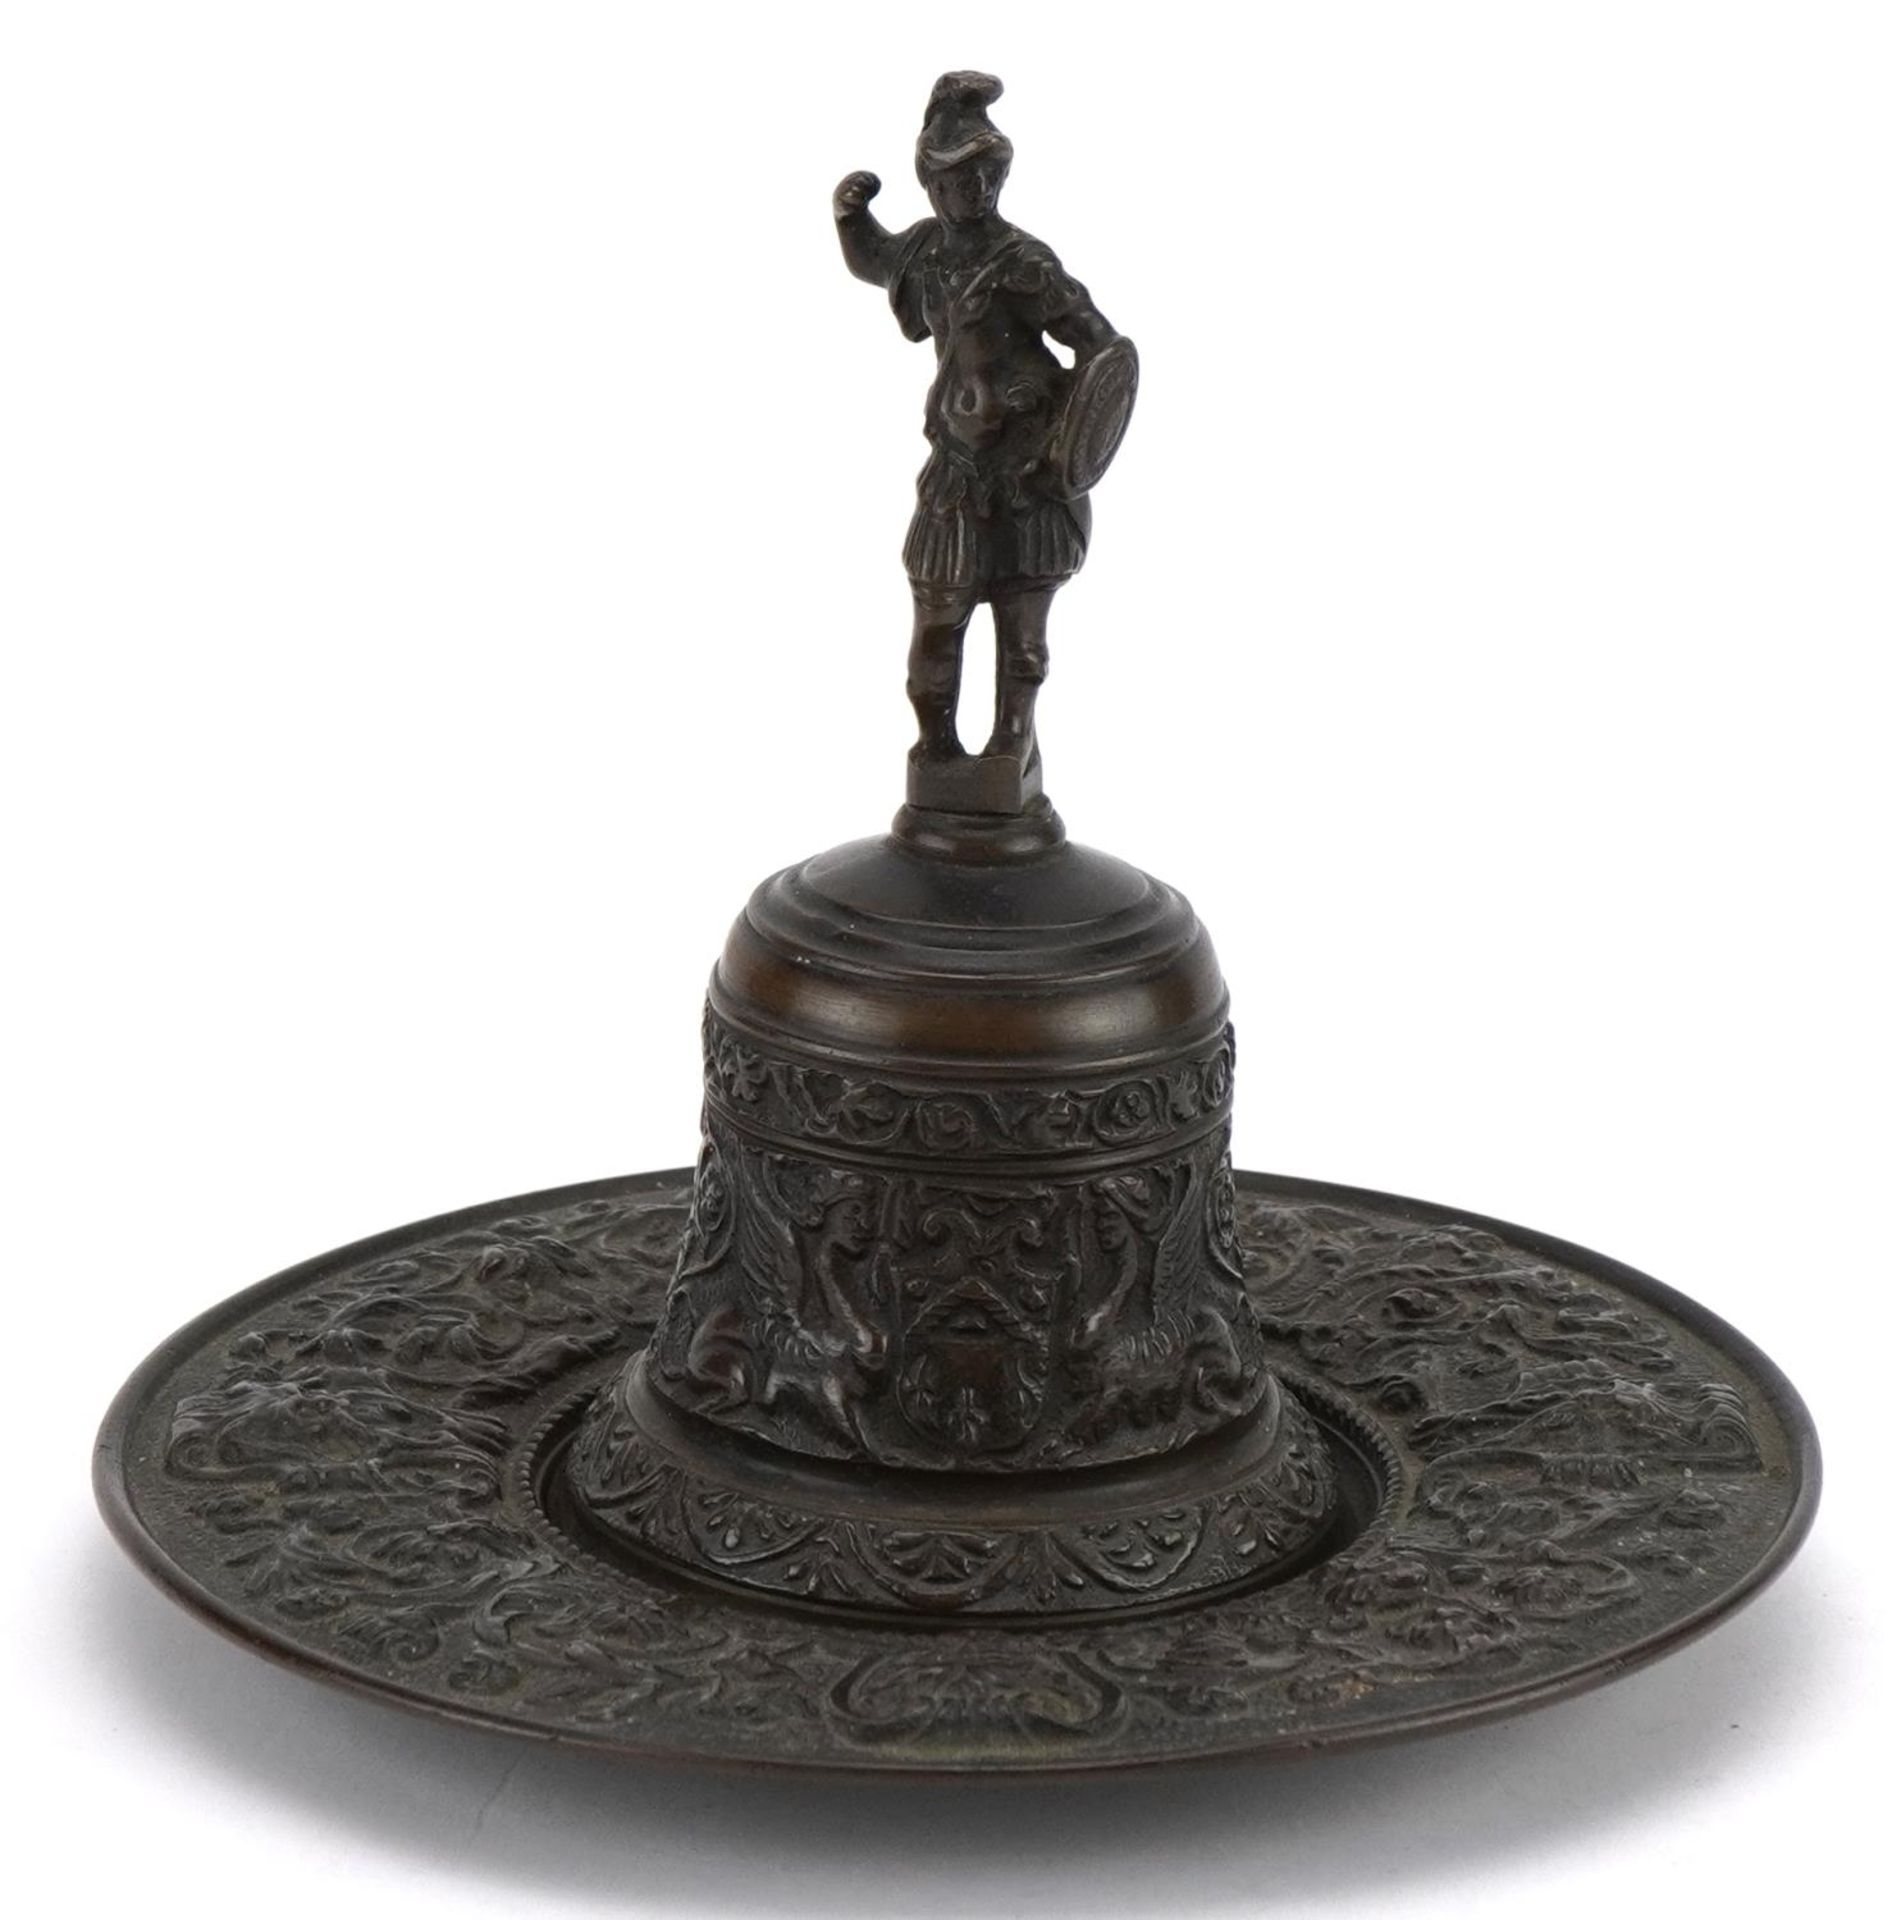 19th century Grand Tour patinated bronze bell on stand with figural handle cast with mythical